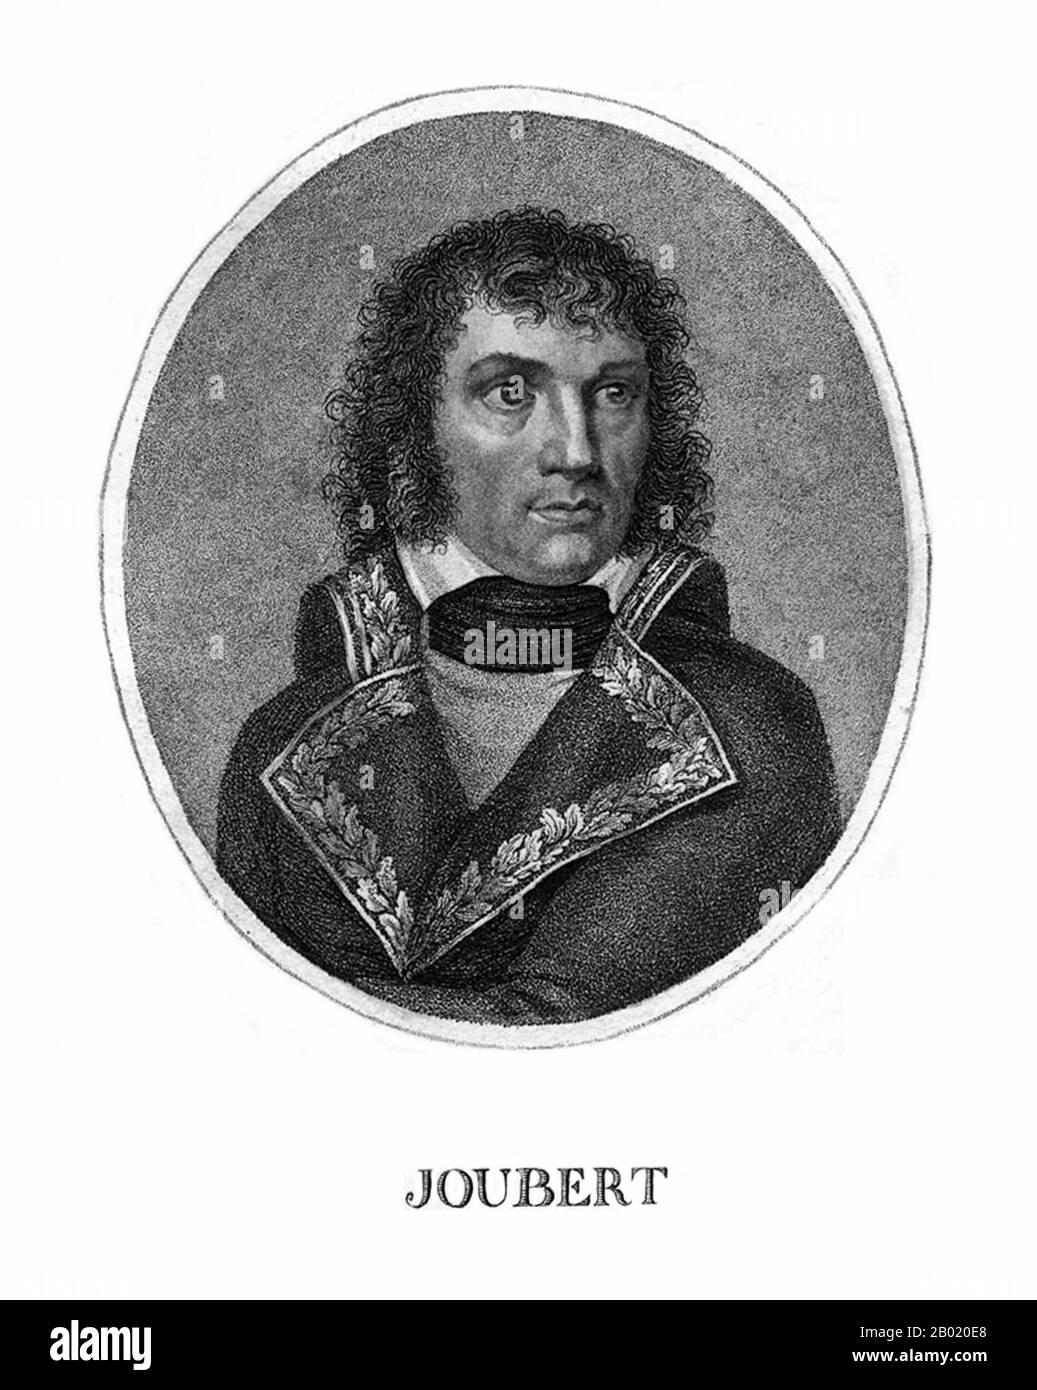 Joseph Joubert (7 May 1754 in Montignac, Périgord – 4 May 1824 in Paris) was a French moralist and essayist, remembered today largely for his Pensées (Thoughts), which was published posthumously.  From the age of fourteen Joubert attended a religious college in Toulouse, where he later taught until 1776. In 1778 he went to Paris where he met D'Alembert and Diderot, amongst others, and later became friends with a young writer and diplomat, Chateaubriand.  He alternated between living in Paris with his friends and life in the privacy of the countryside in Villeneuve-sur-Yonne. He was appointed i Stock Photo